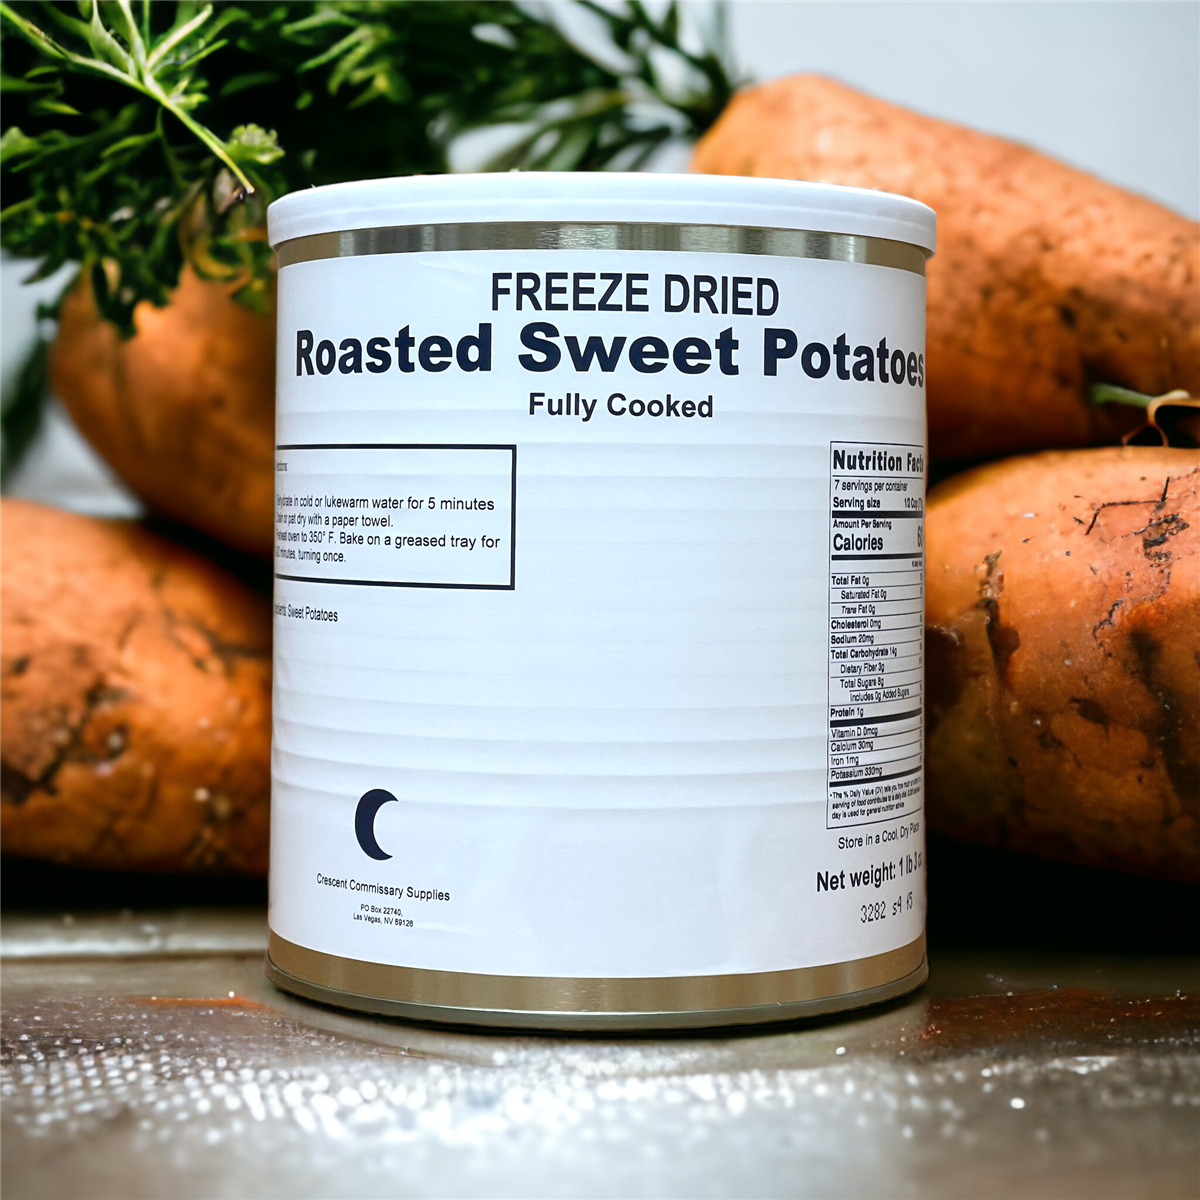 Freeze Dried Military Surplus Roasted Sweet Potatoes, Fully Cooked